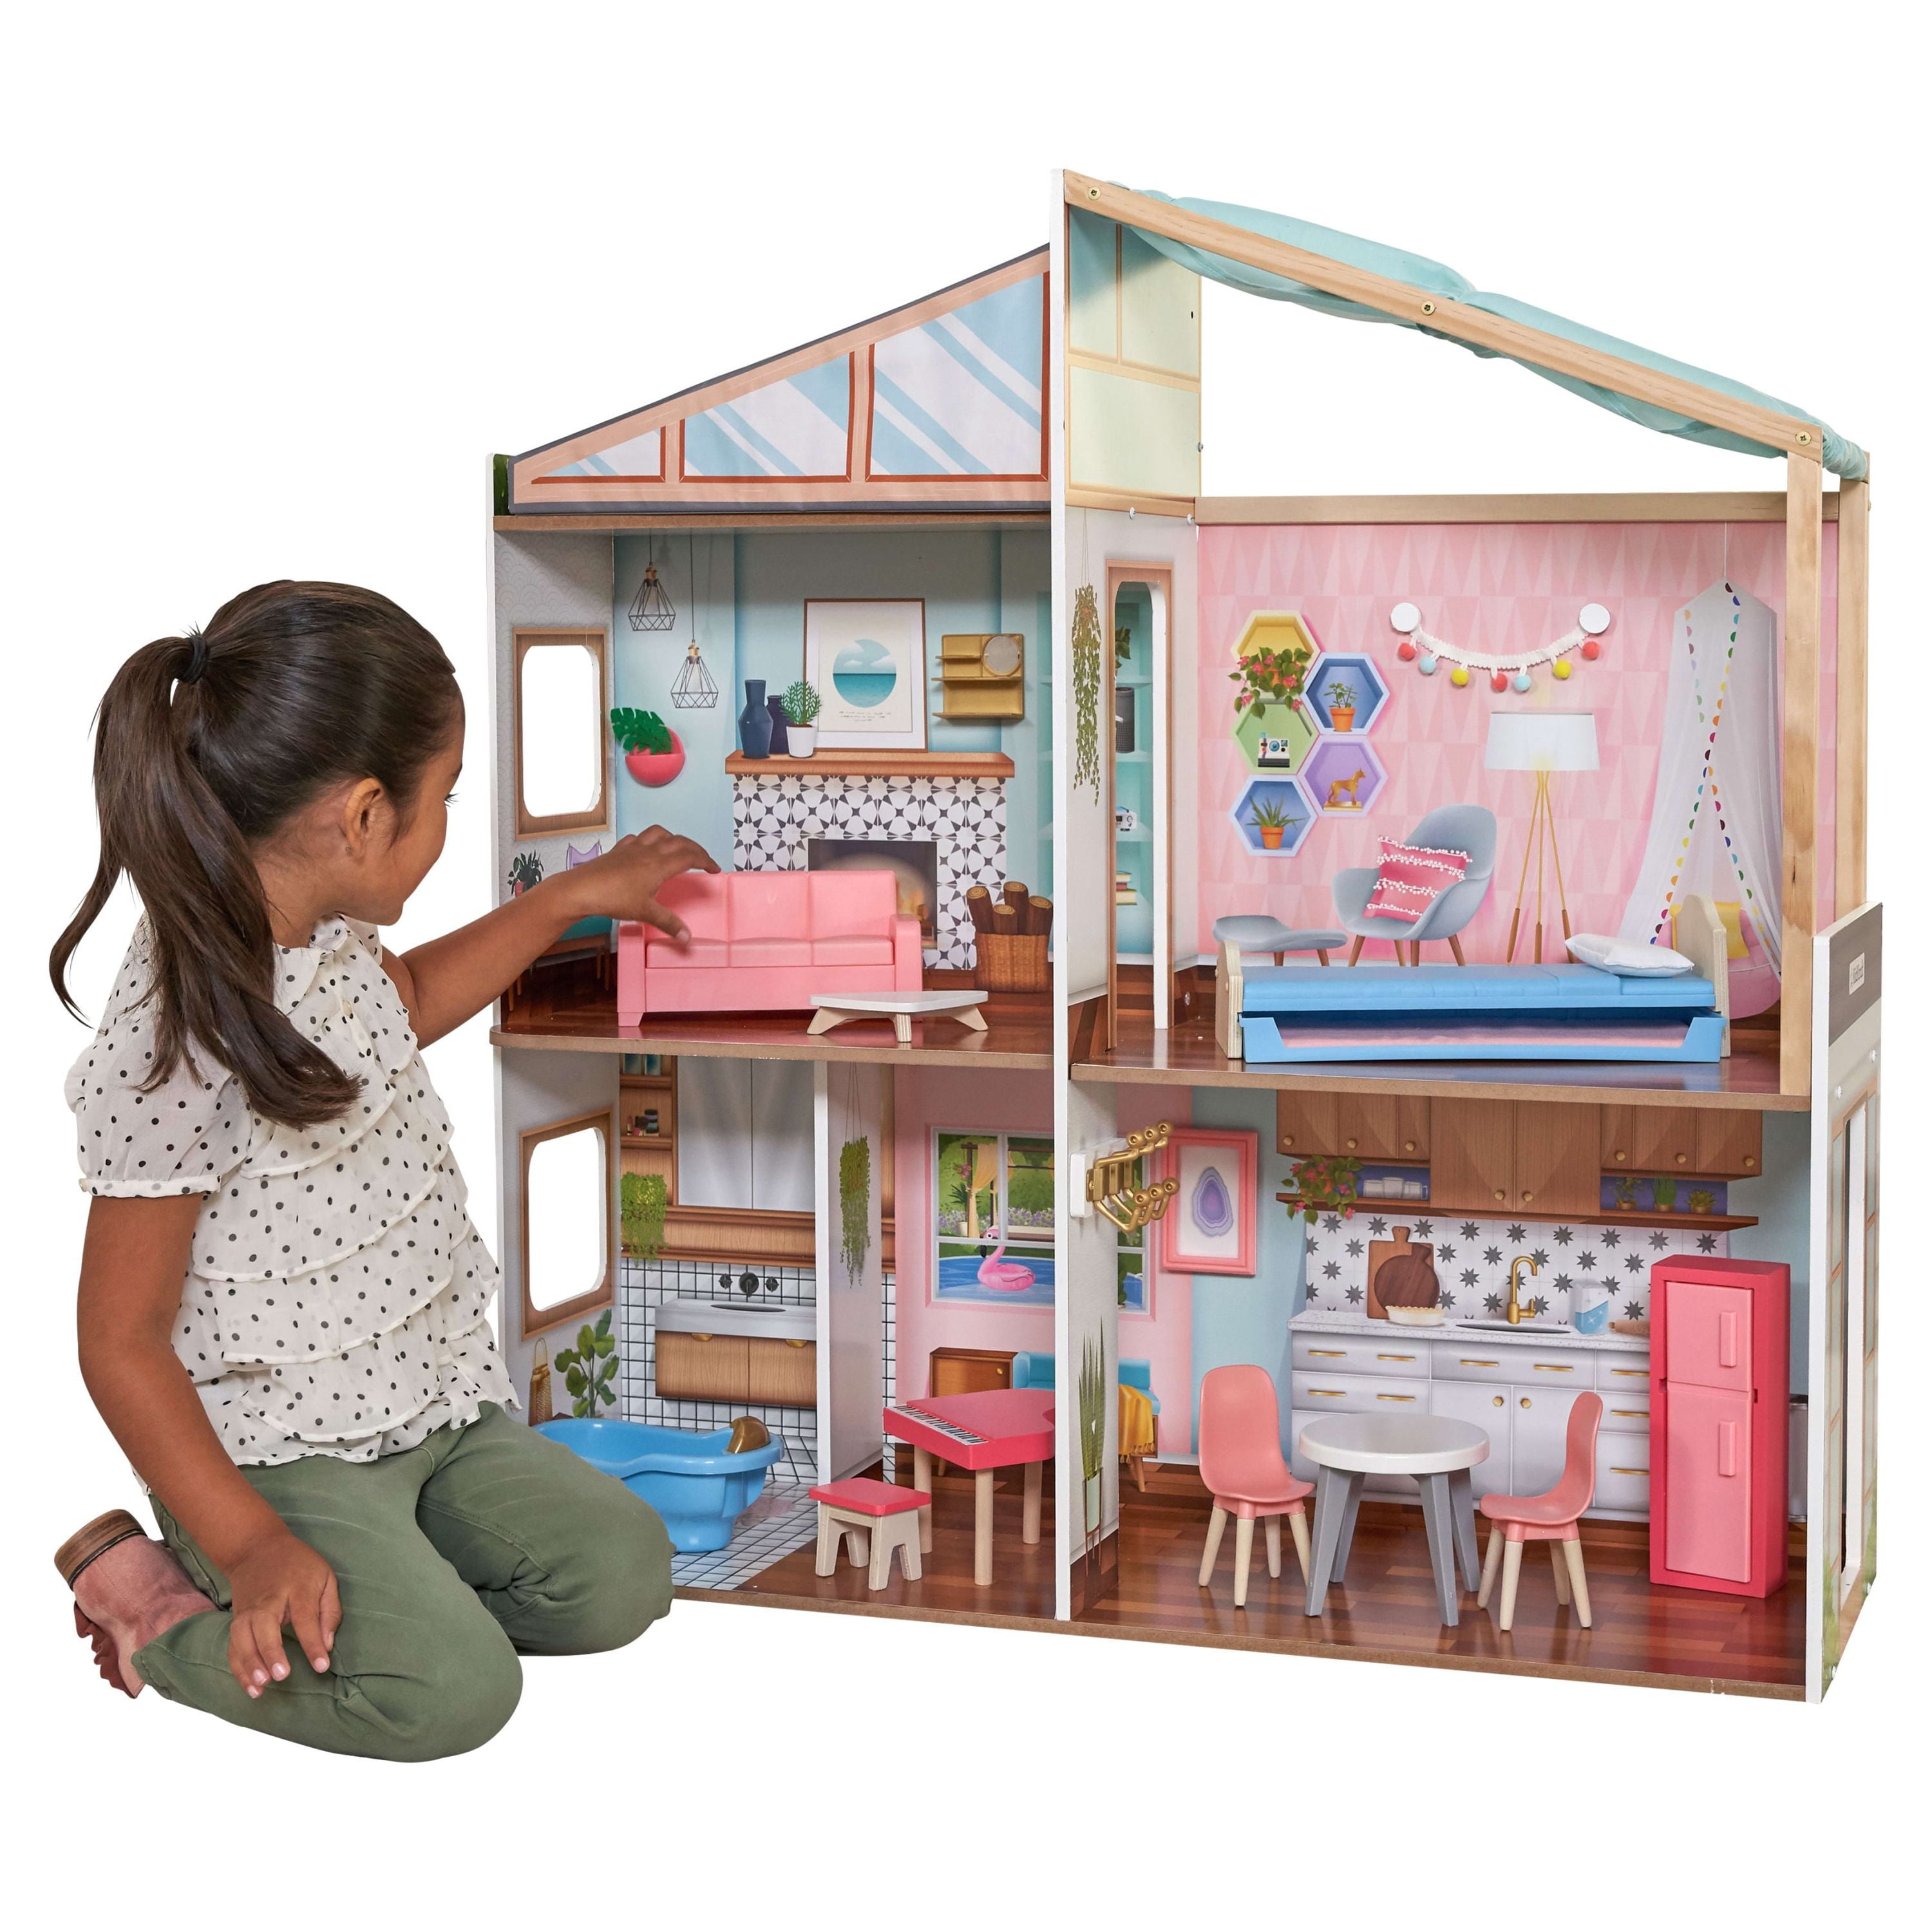 Let's DIY Our Own Magnetic Wallpaper for the Dollhouse and Make a Working  Wood Door 